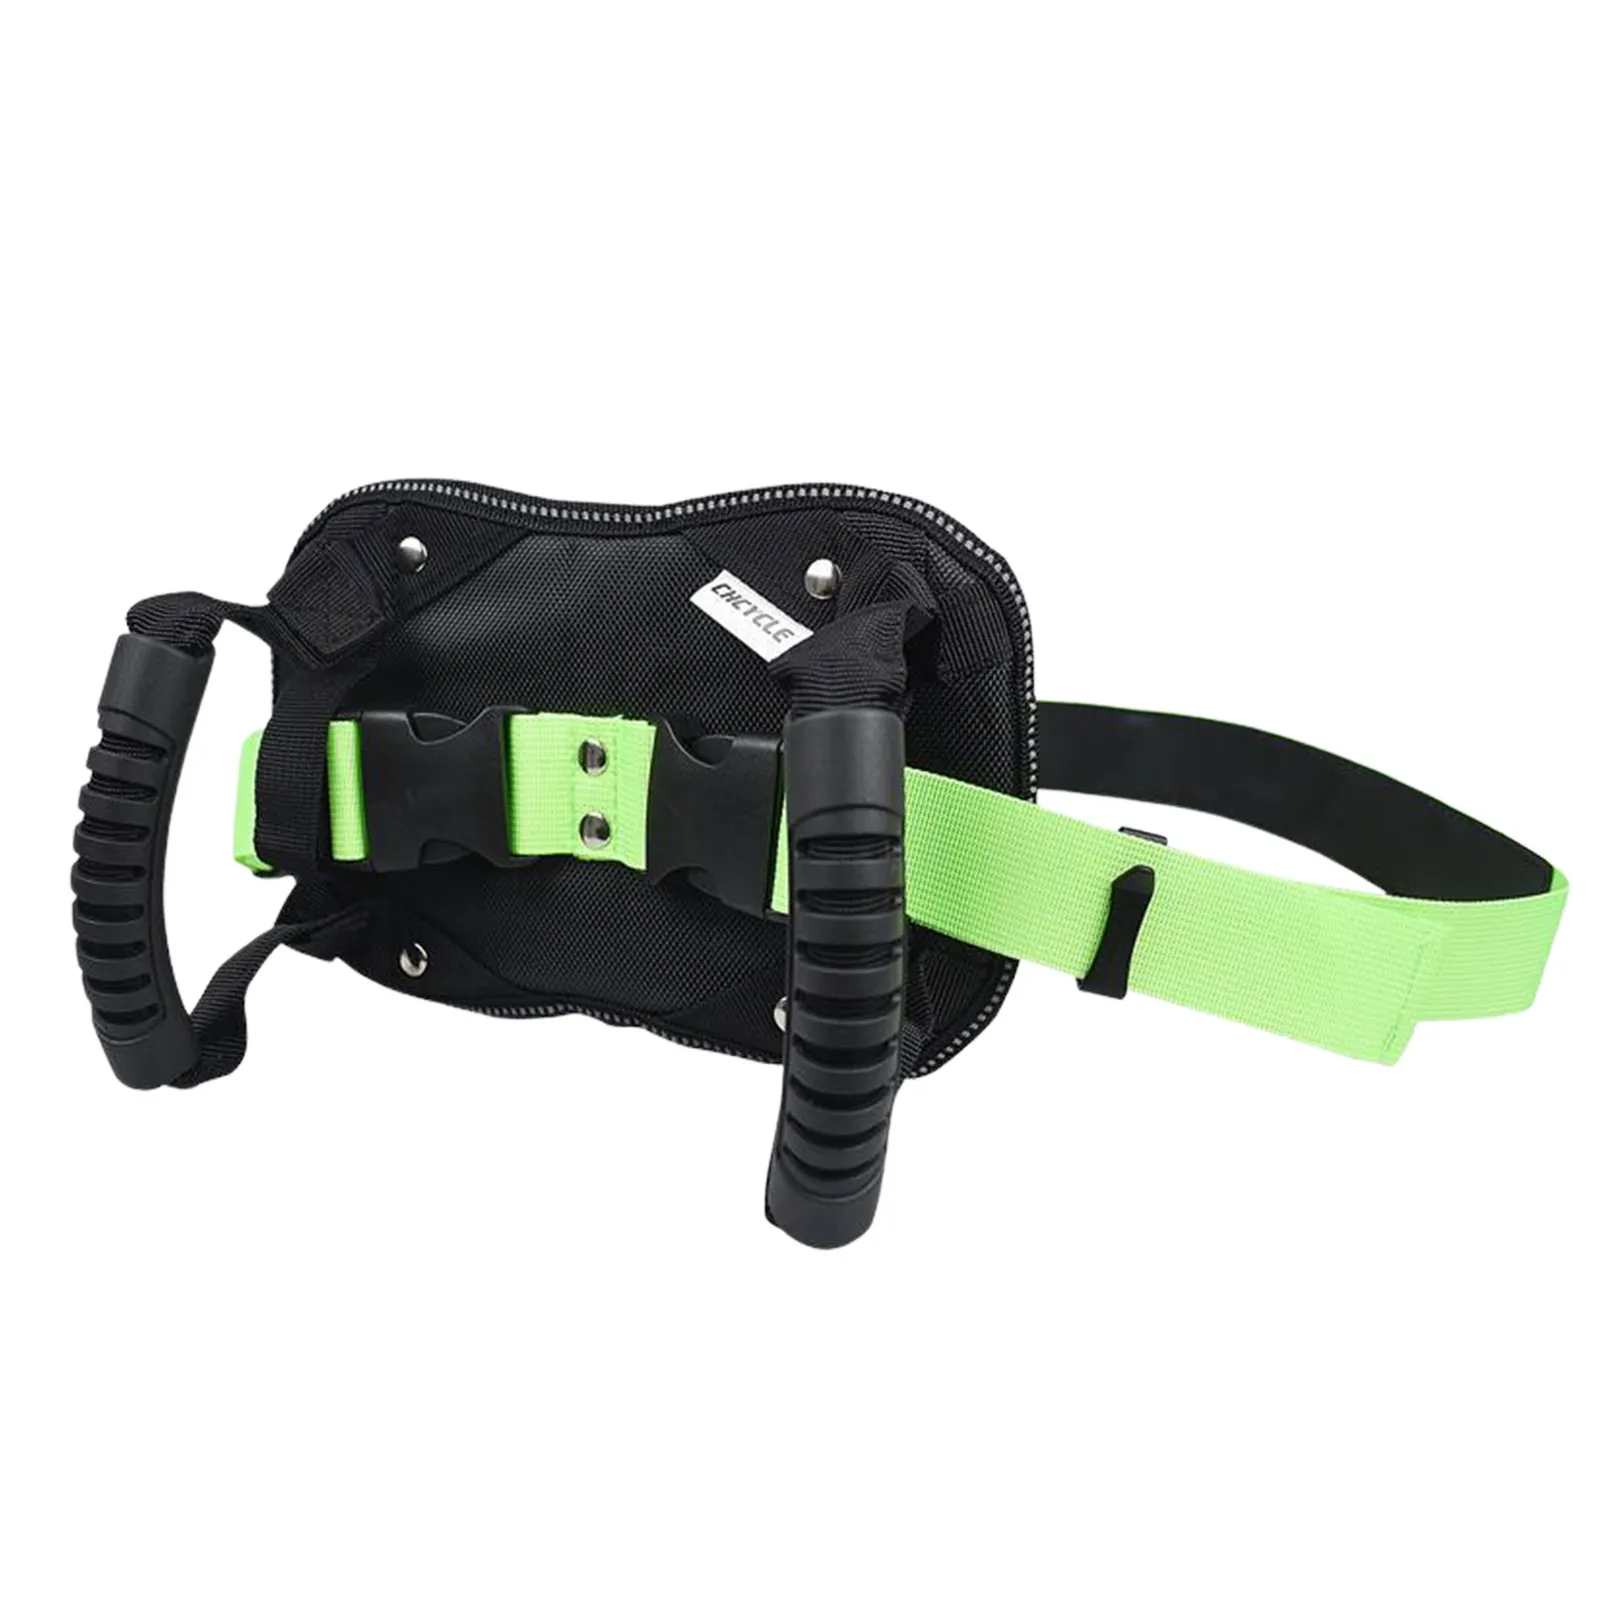 

Motorcycle Safety Belt For Passenger Motorcycle Passenger Pillion Grab Handles Driver Belly Strap Pad For Children And Passenger